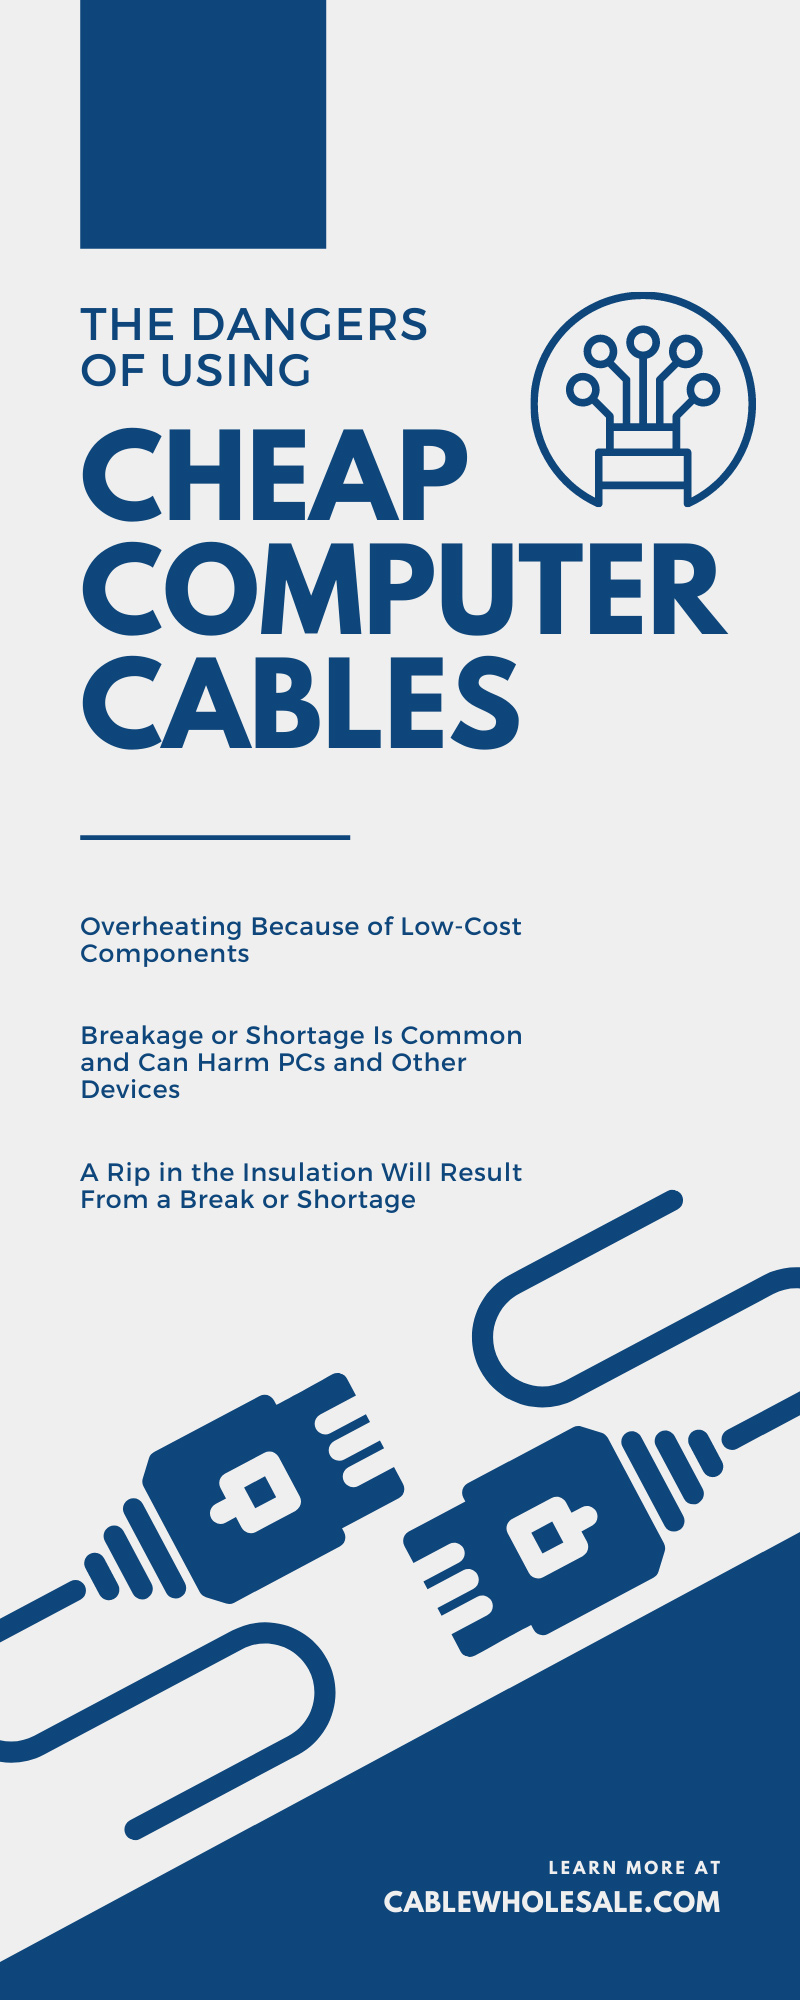 The Dangers of Using Cheap Computer Cables